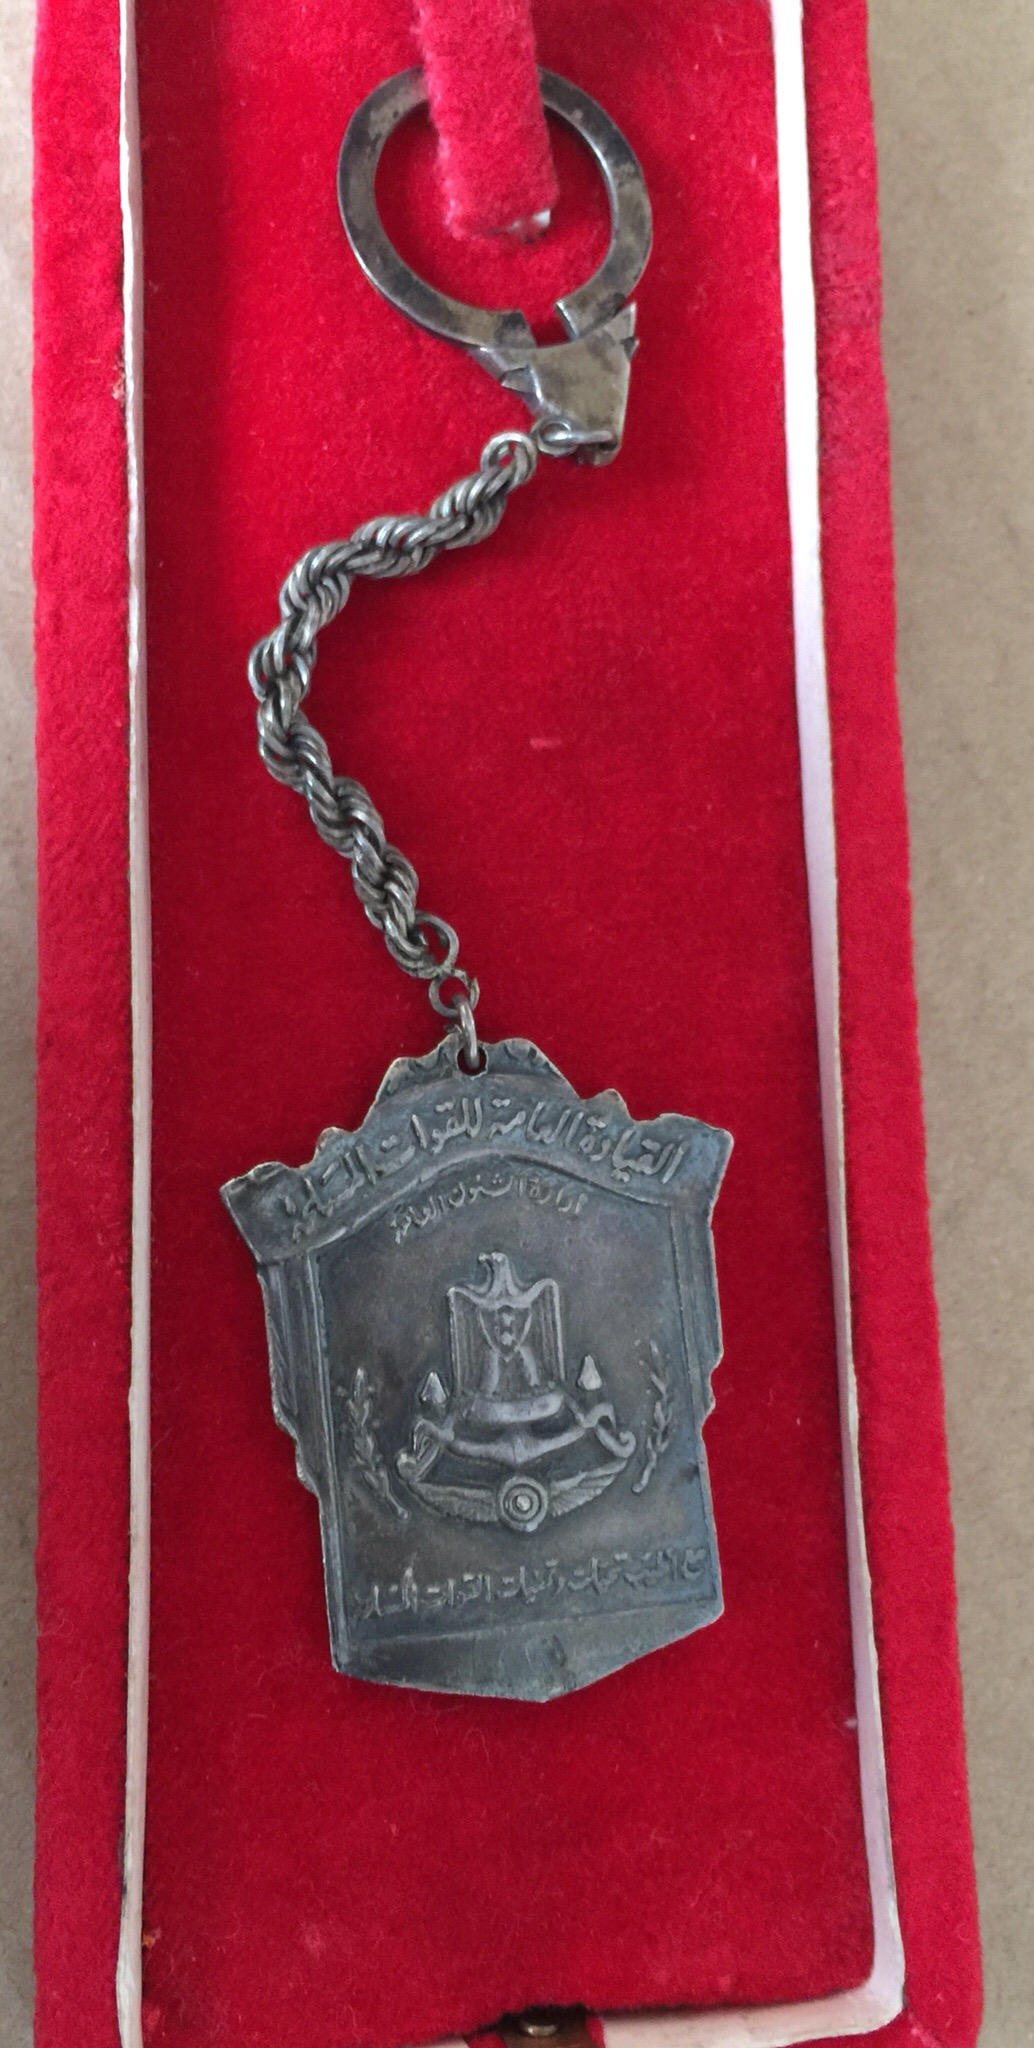 1950 Syria Army Military Silver Commemorative Medal Badge Chain Ministry of War